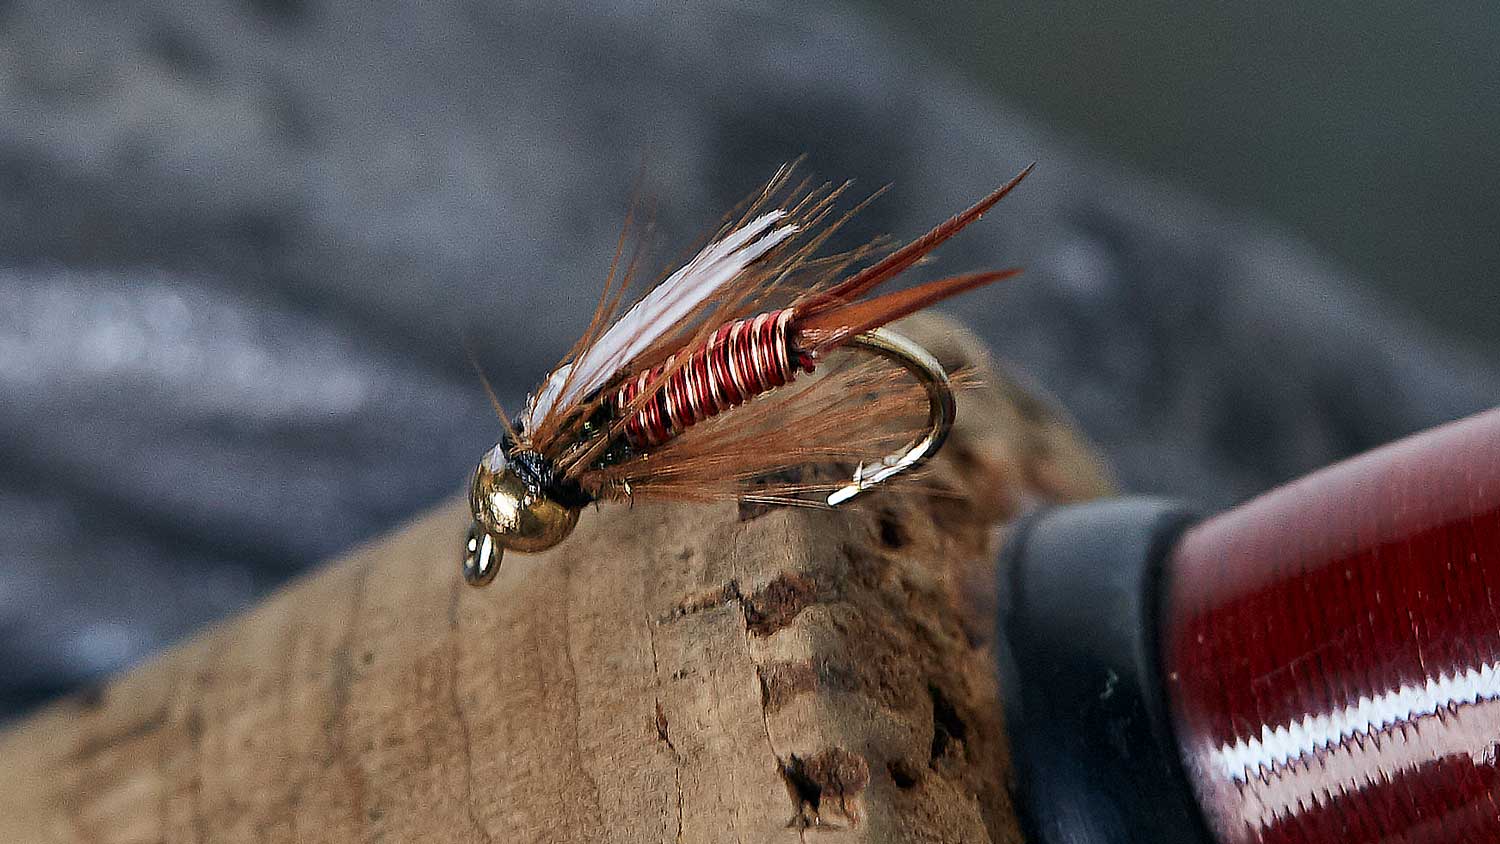 Nymphing, Dry Fly or Streamer - What Fly Fishing is the Best?